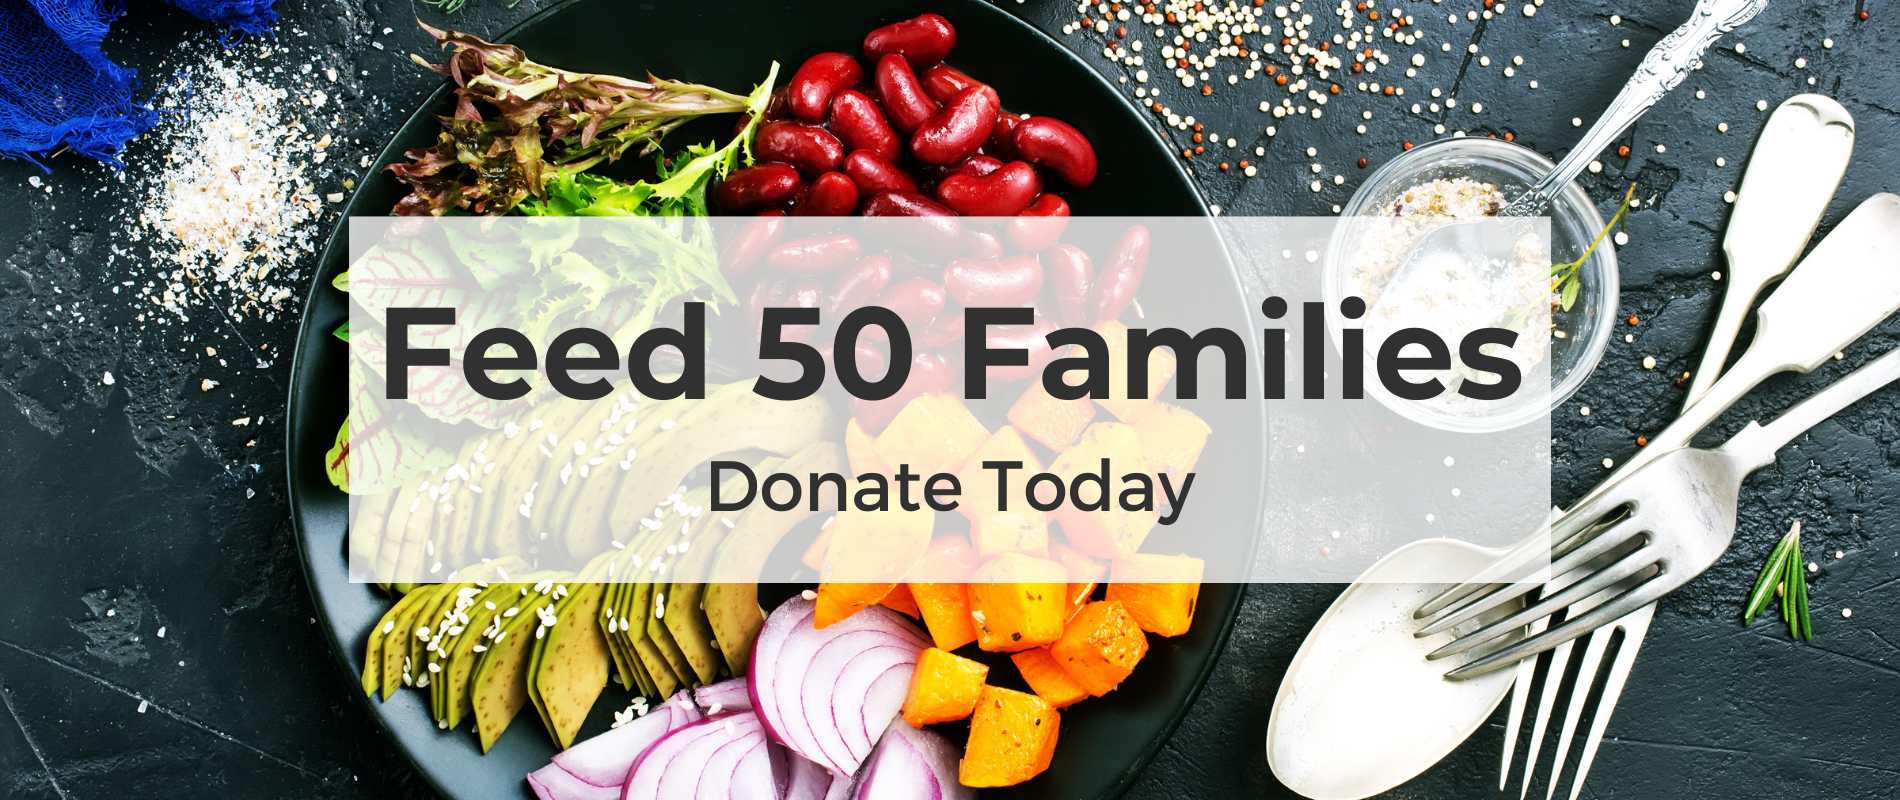 Feed 50 Families banner